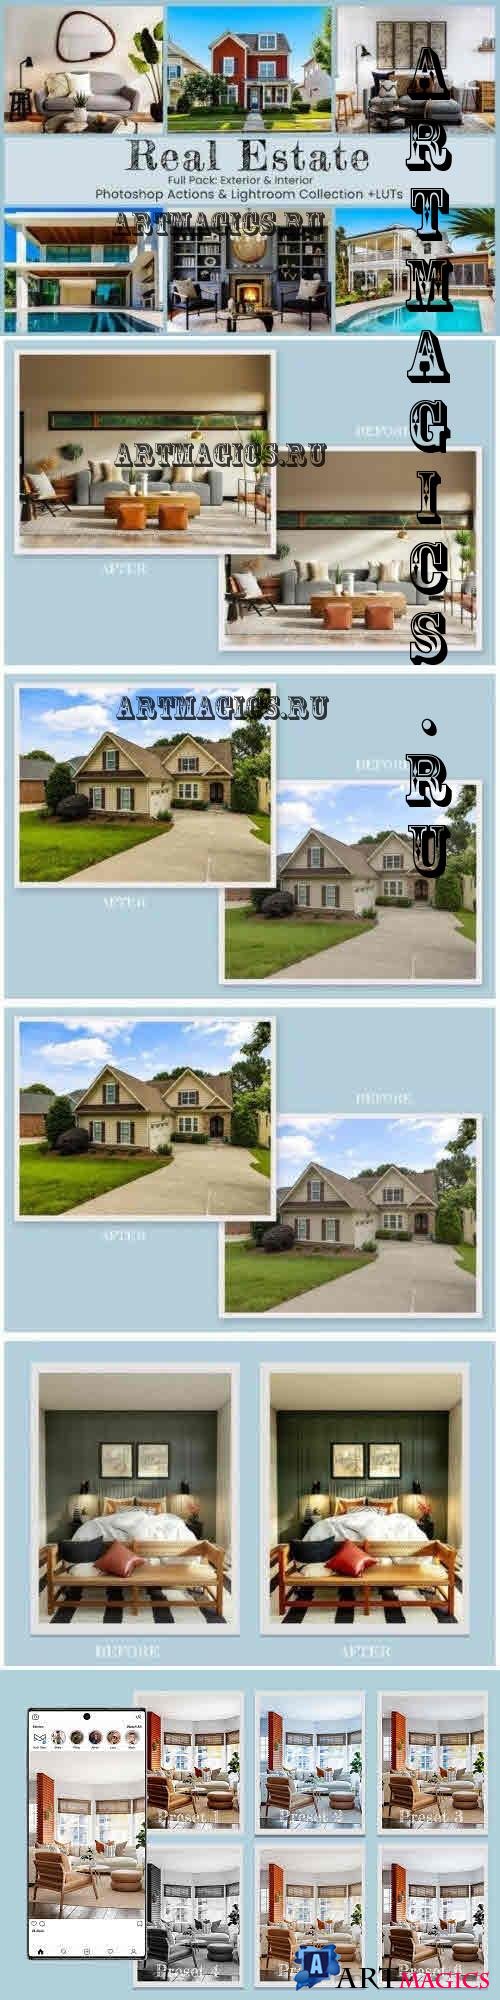 42 Real Estate Photoshop actions LR - 12746635